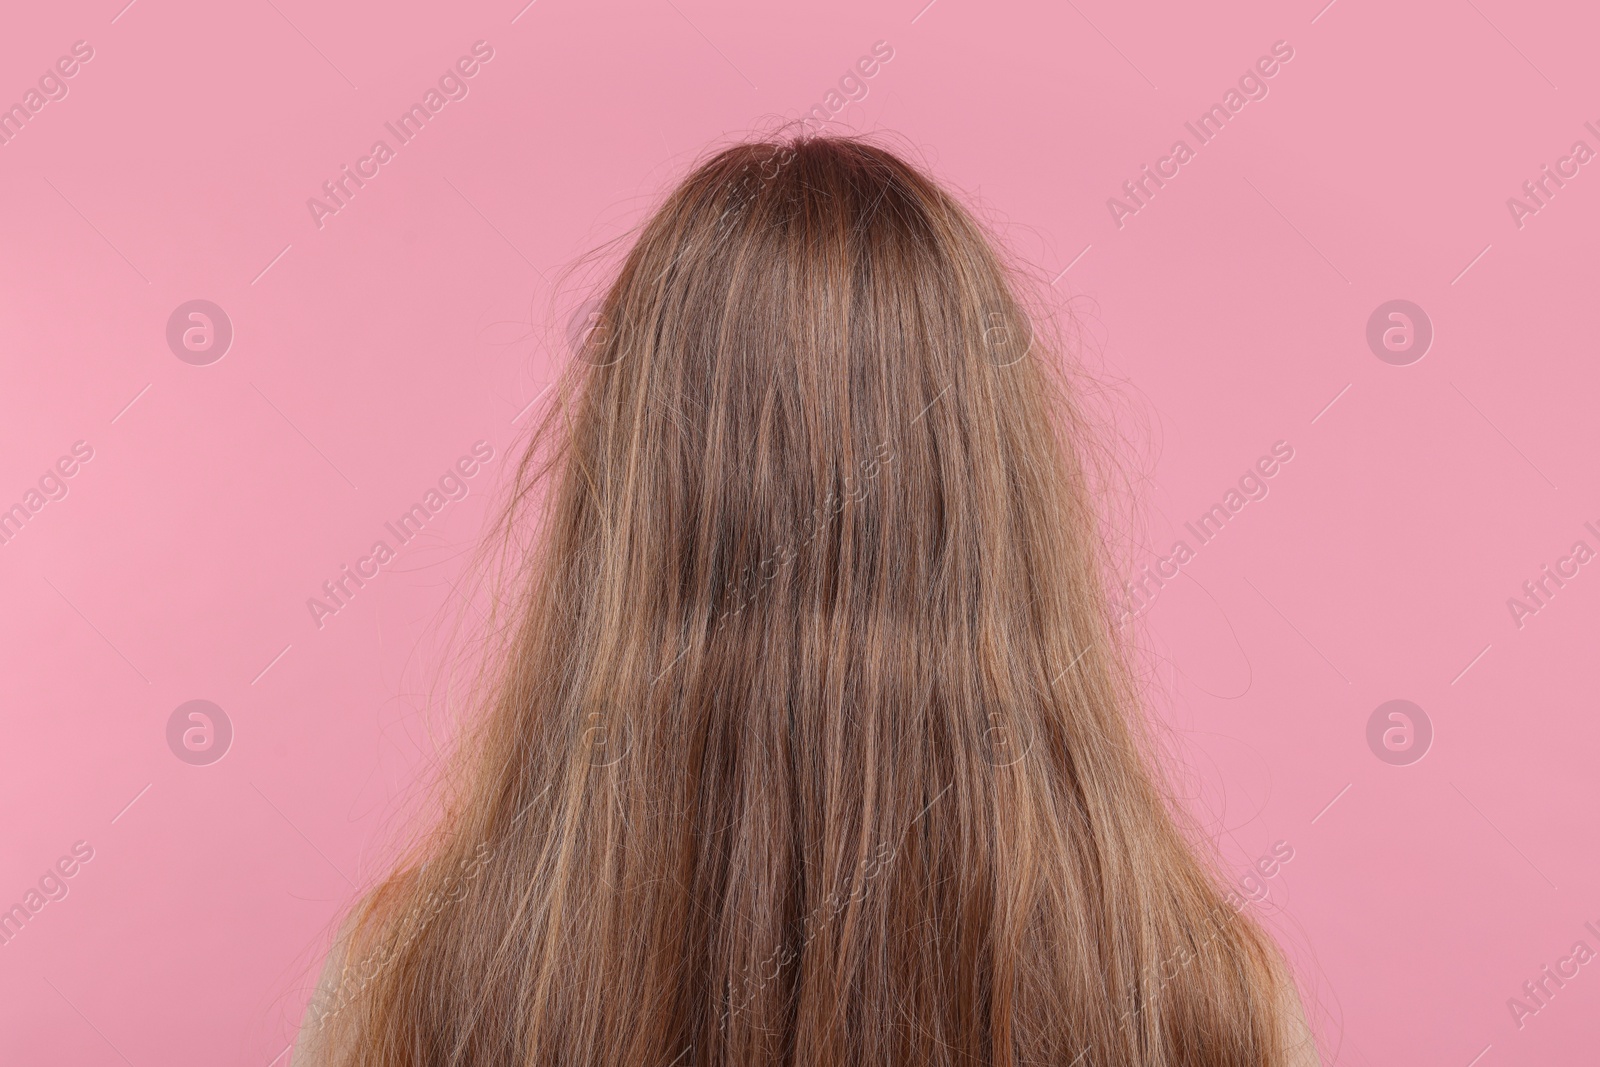 Photo of Woman with damaged hair on pink background, back view